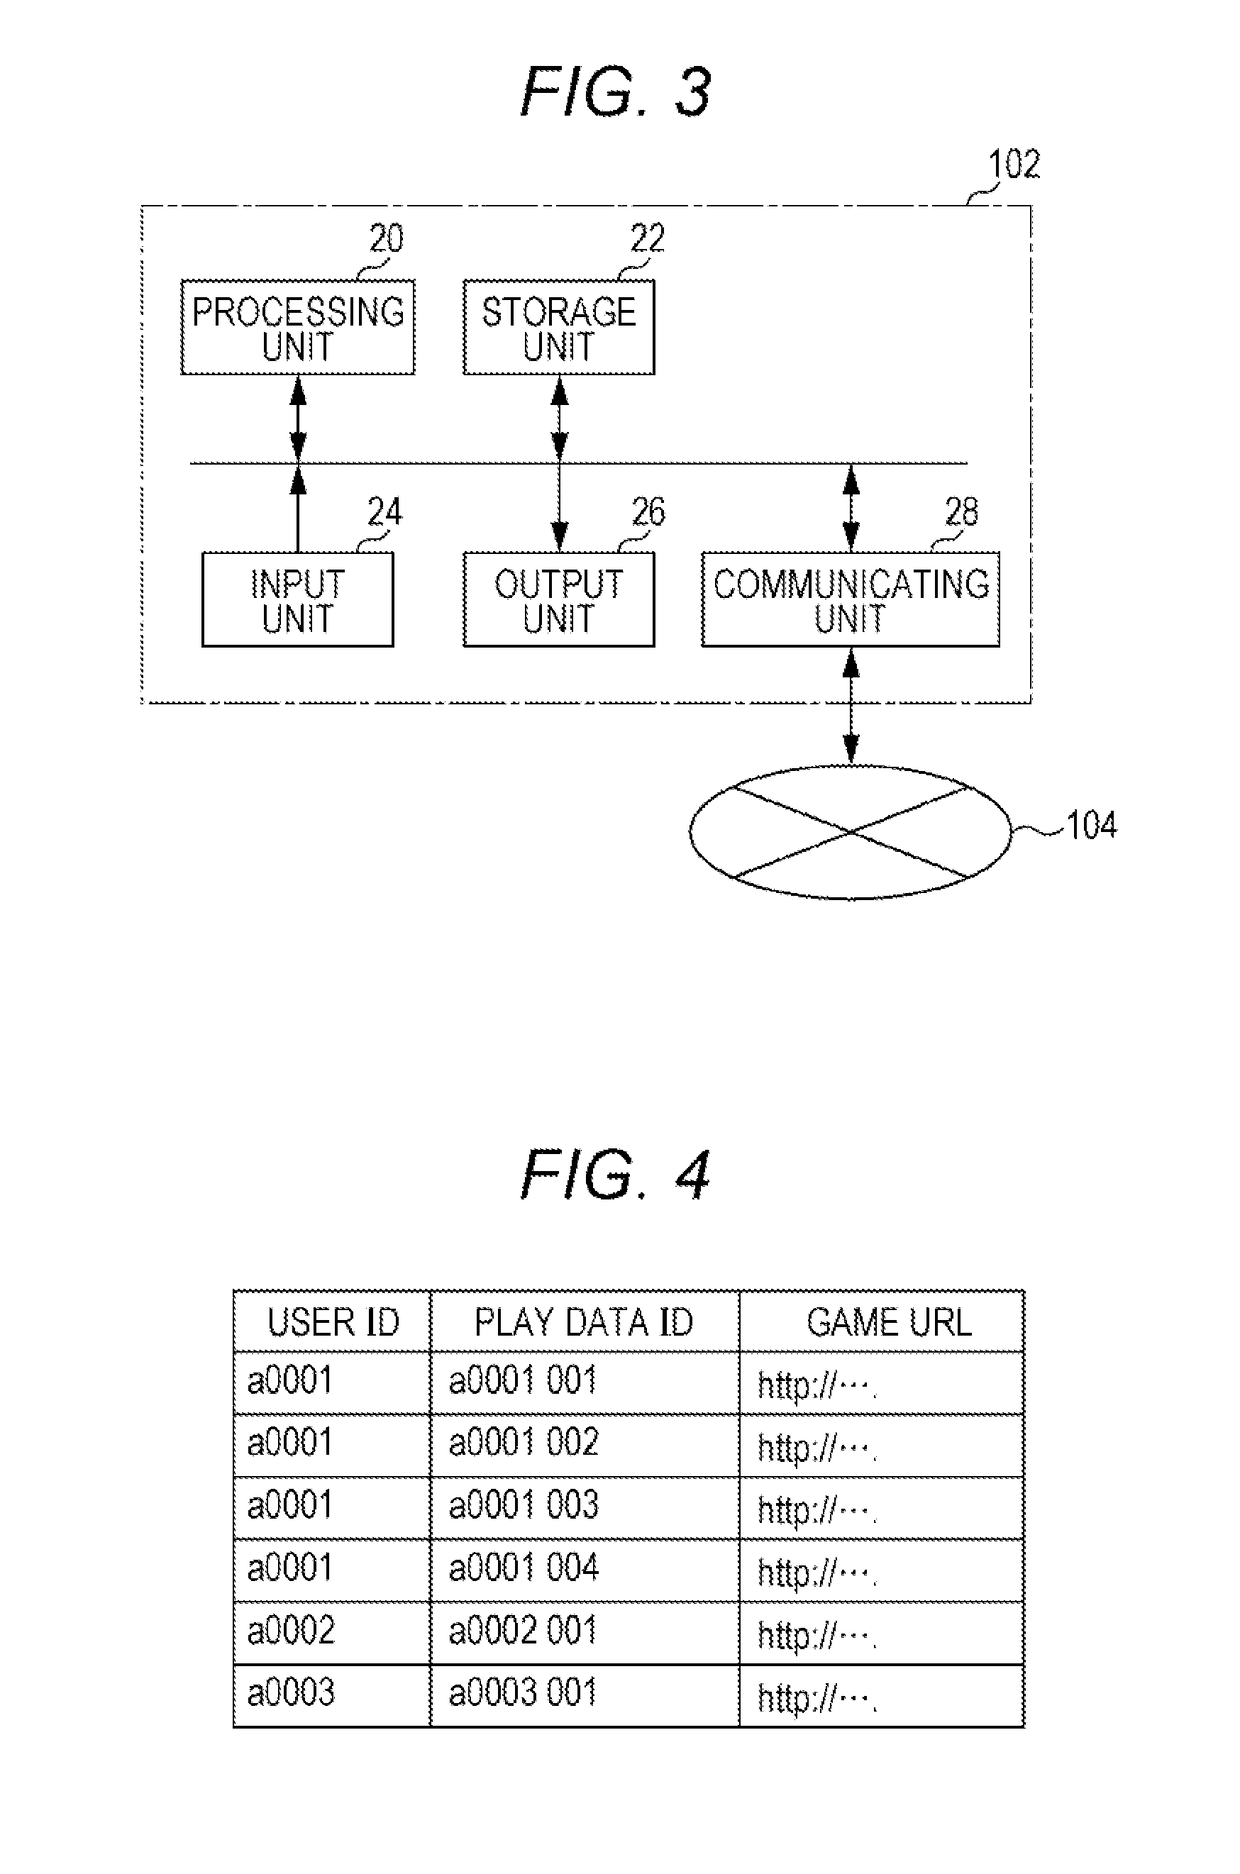 Electronic game providing device and non-transitory computer-readable storage medium storing electronic game program